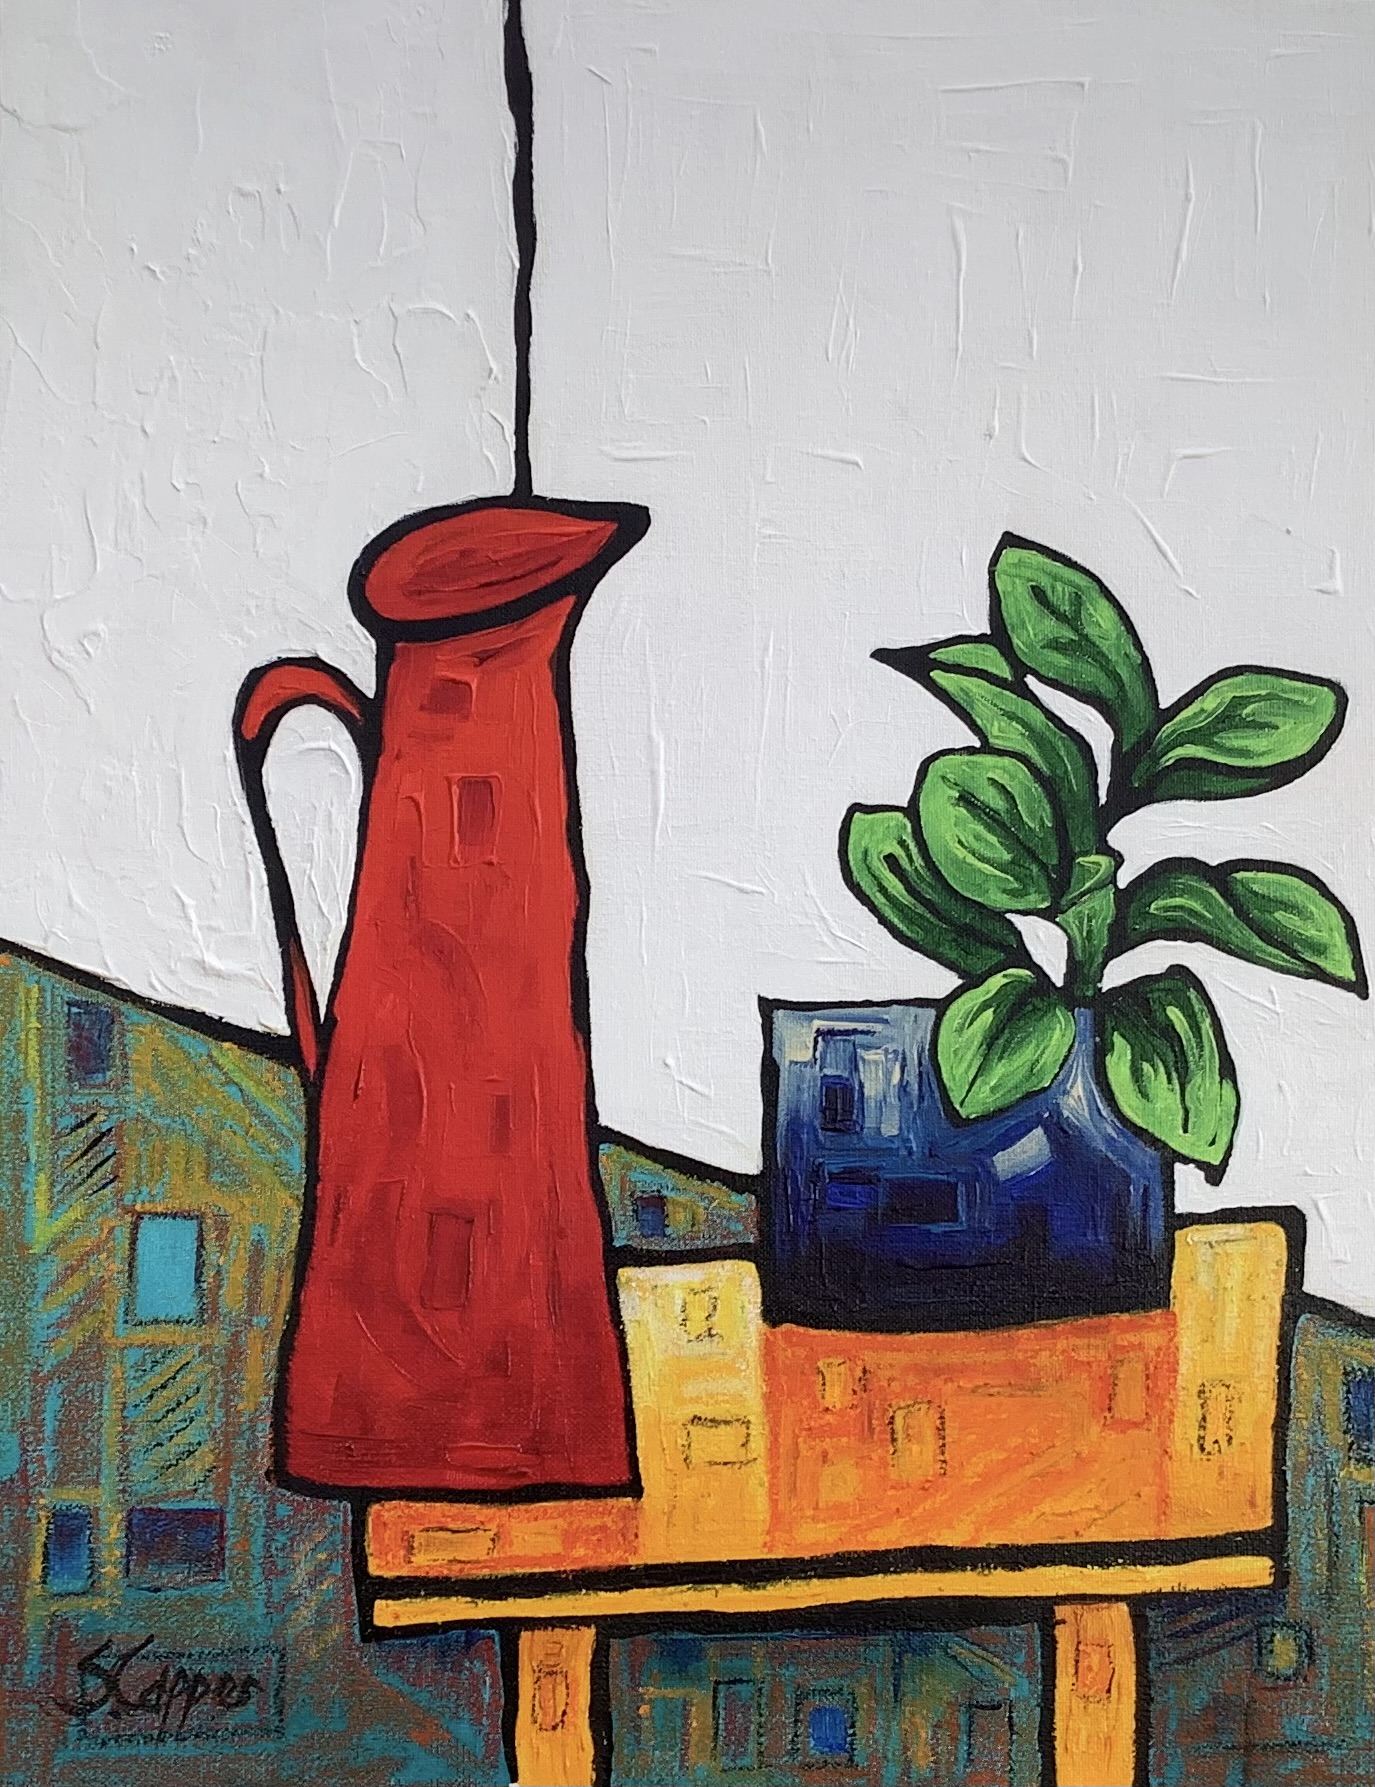 Steve Capper - Red Jug and Green Plant - acrylic on board, size: 51x40cm £1,300